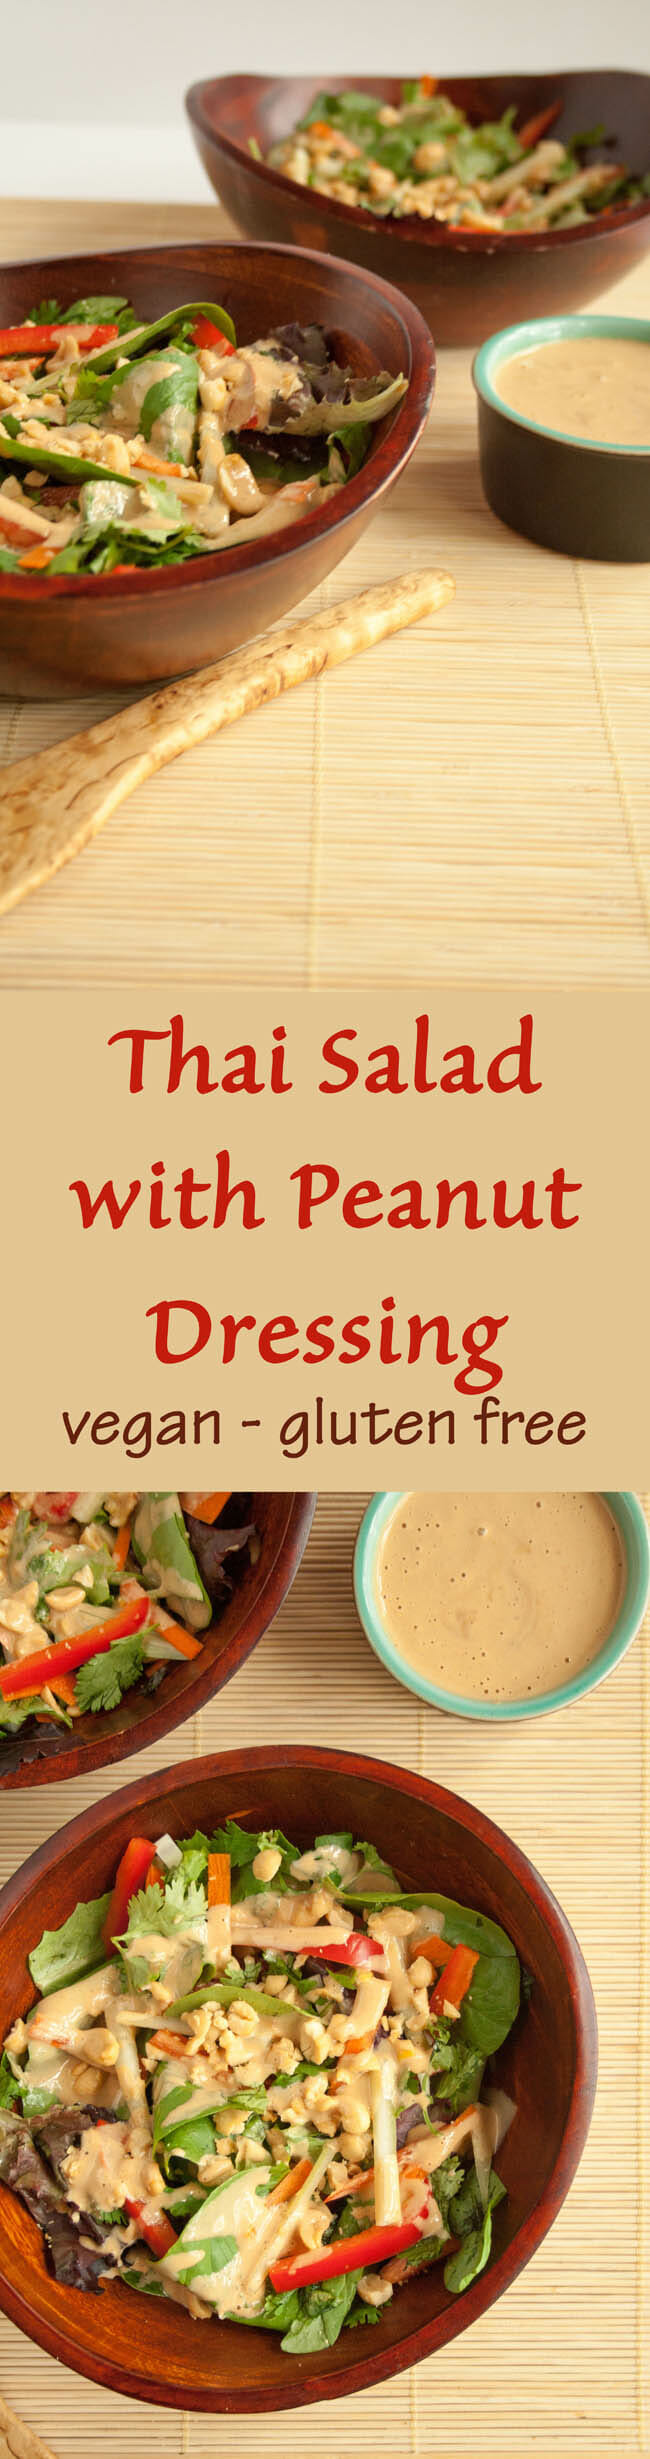 Thai Salad with Peanut Dressing collage photo with text.